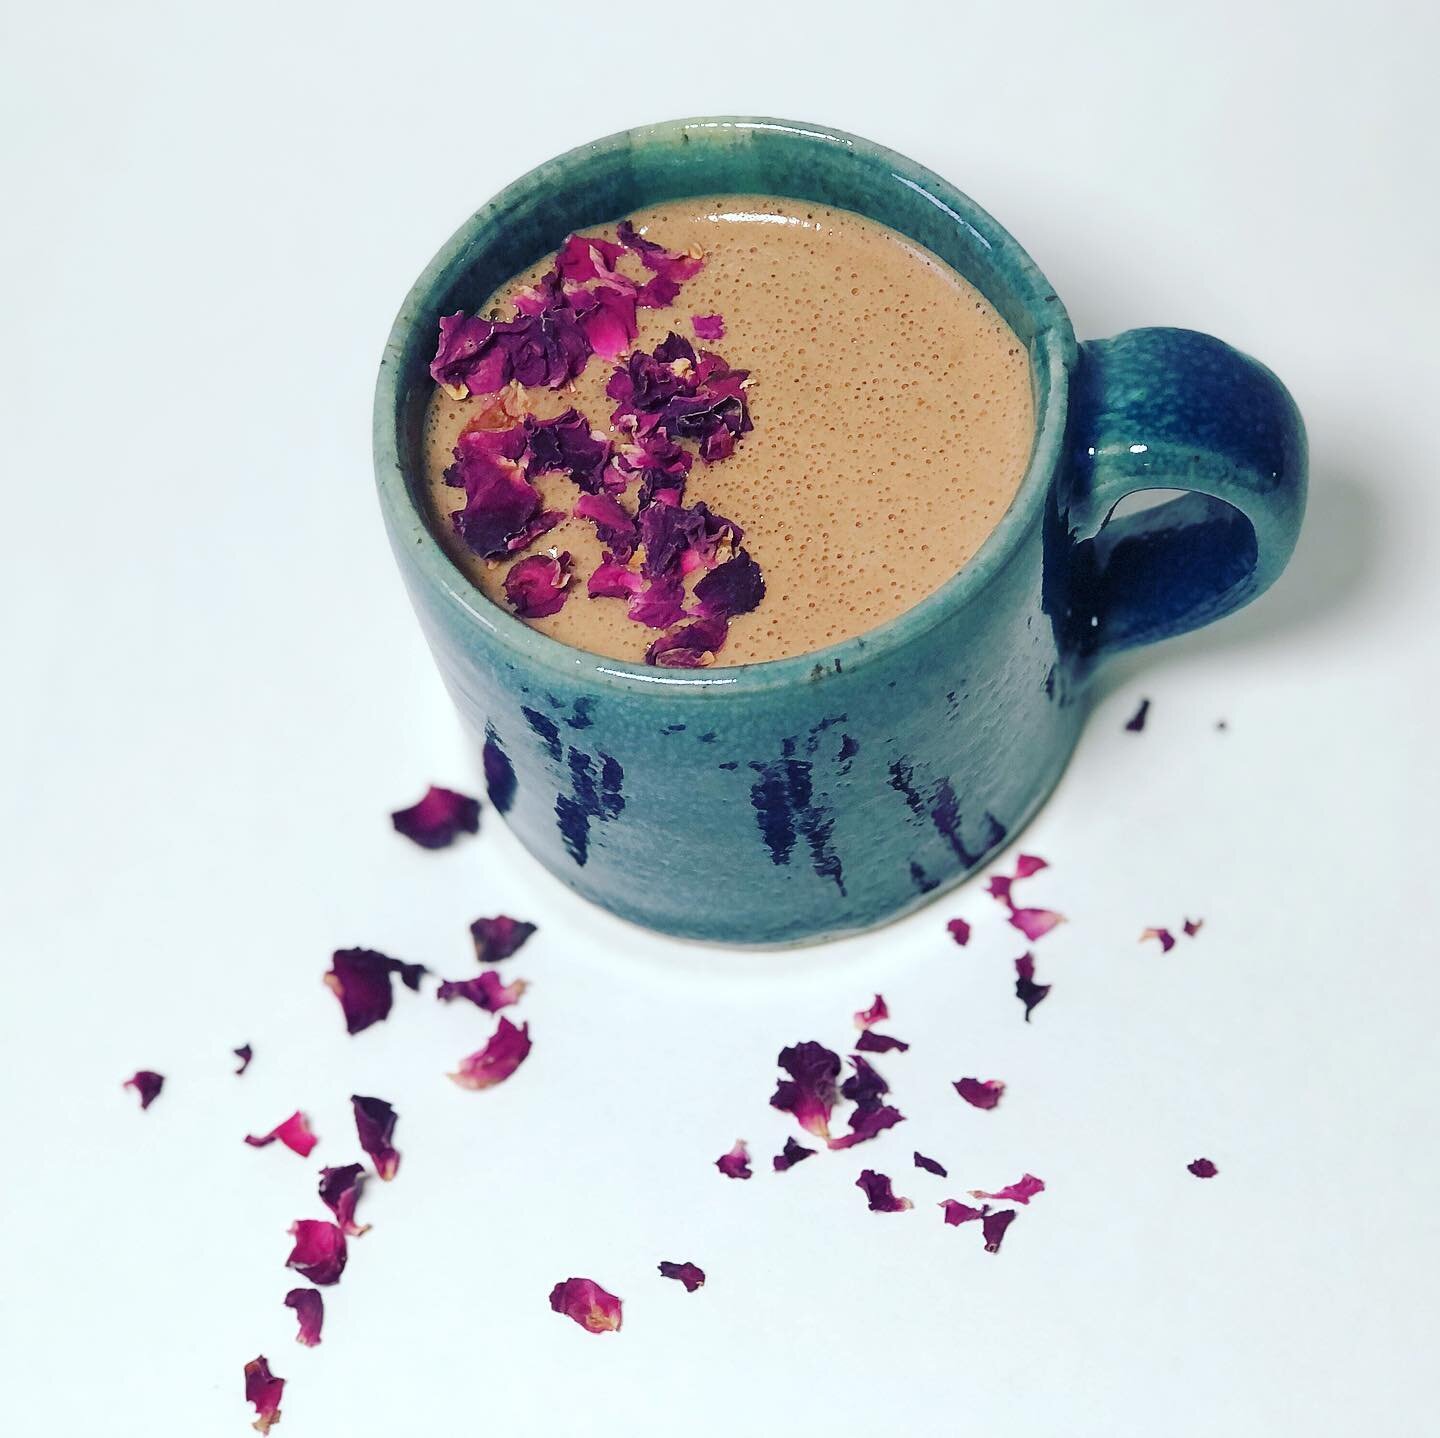 Nothing says love like 🍫 + 🌹 

This creation is divine!
&hearts;️ Cocoa Recoup elixir pod @wiseandwellyyc
&hearts;️ Rose petal tea
&hearts;️ Cacao Luxe honey @drizzle_honey 

To sip on this + feel the love, get your Cocoa Recoup today! Link in bio 